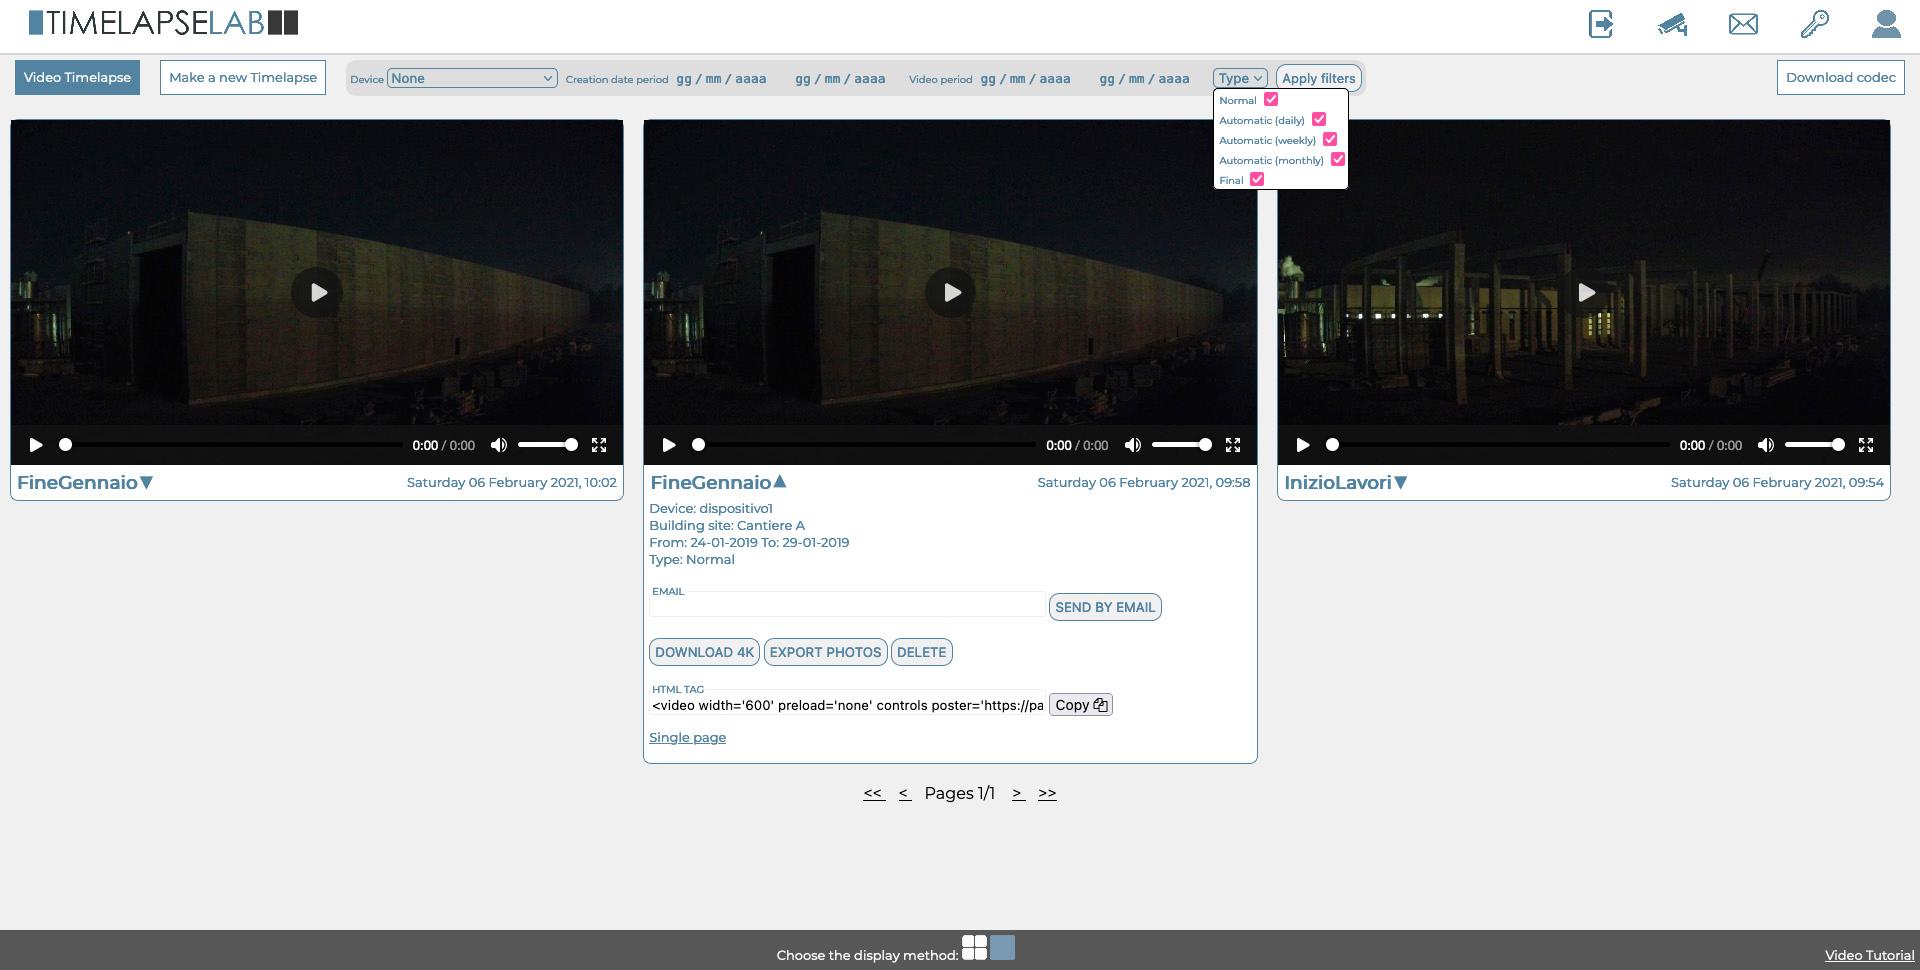 Timelapse Lab - In your personal area is possible to watch all timelapse videos automatically created by the software.